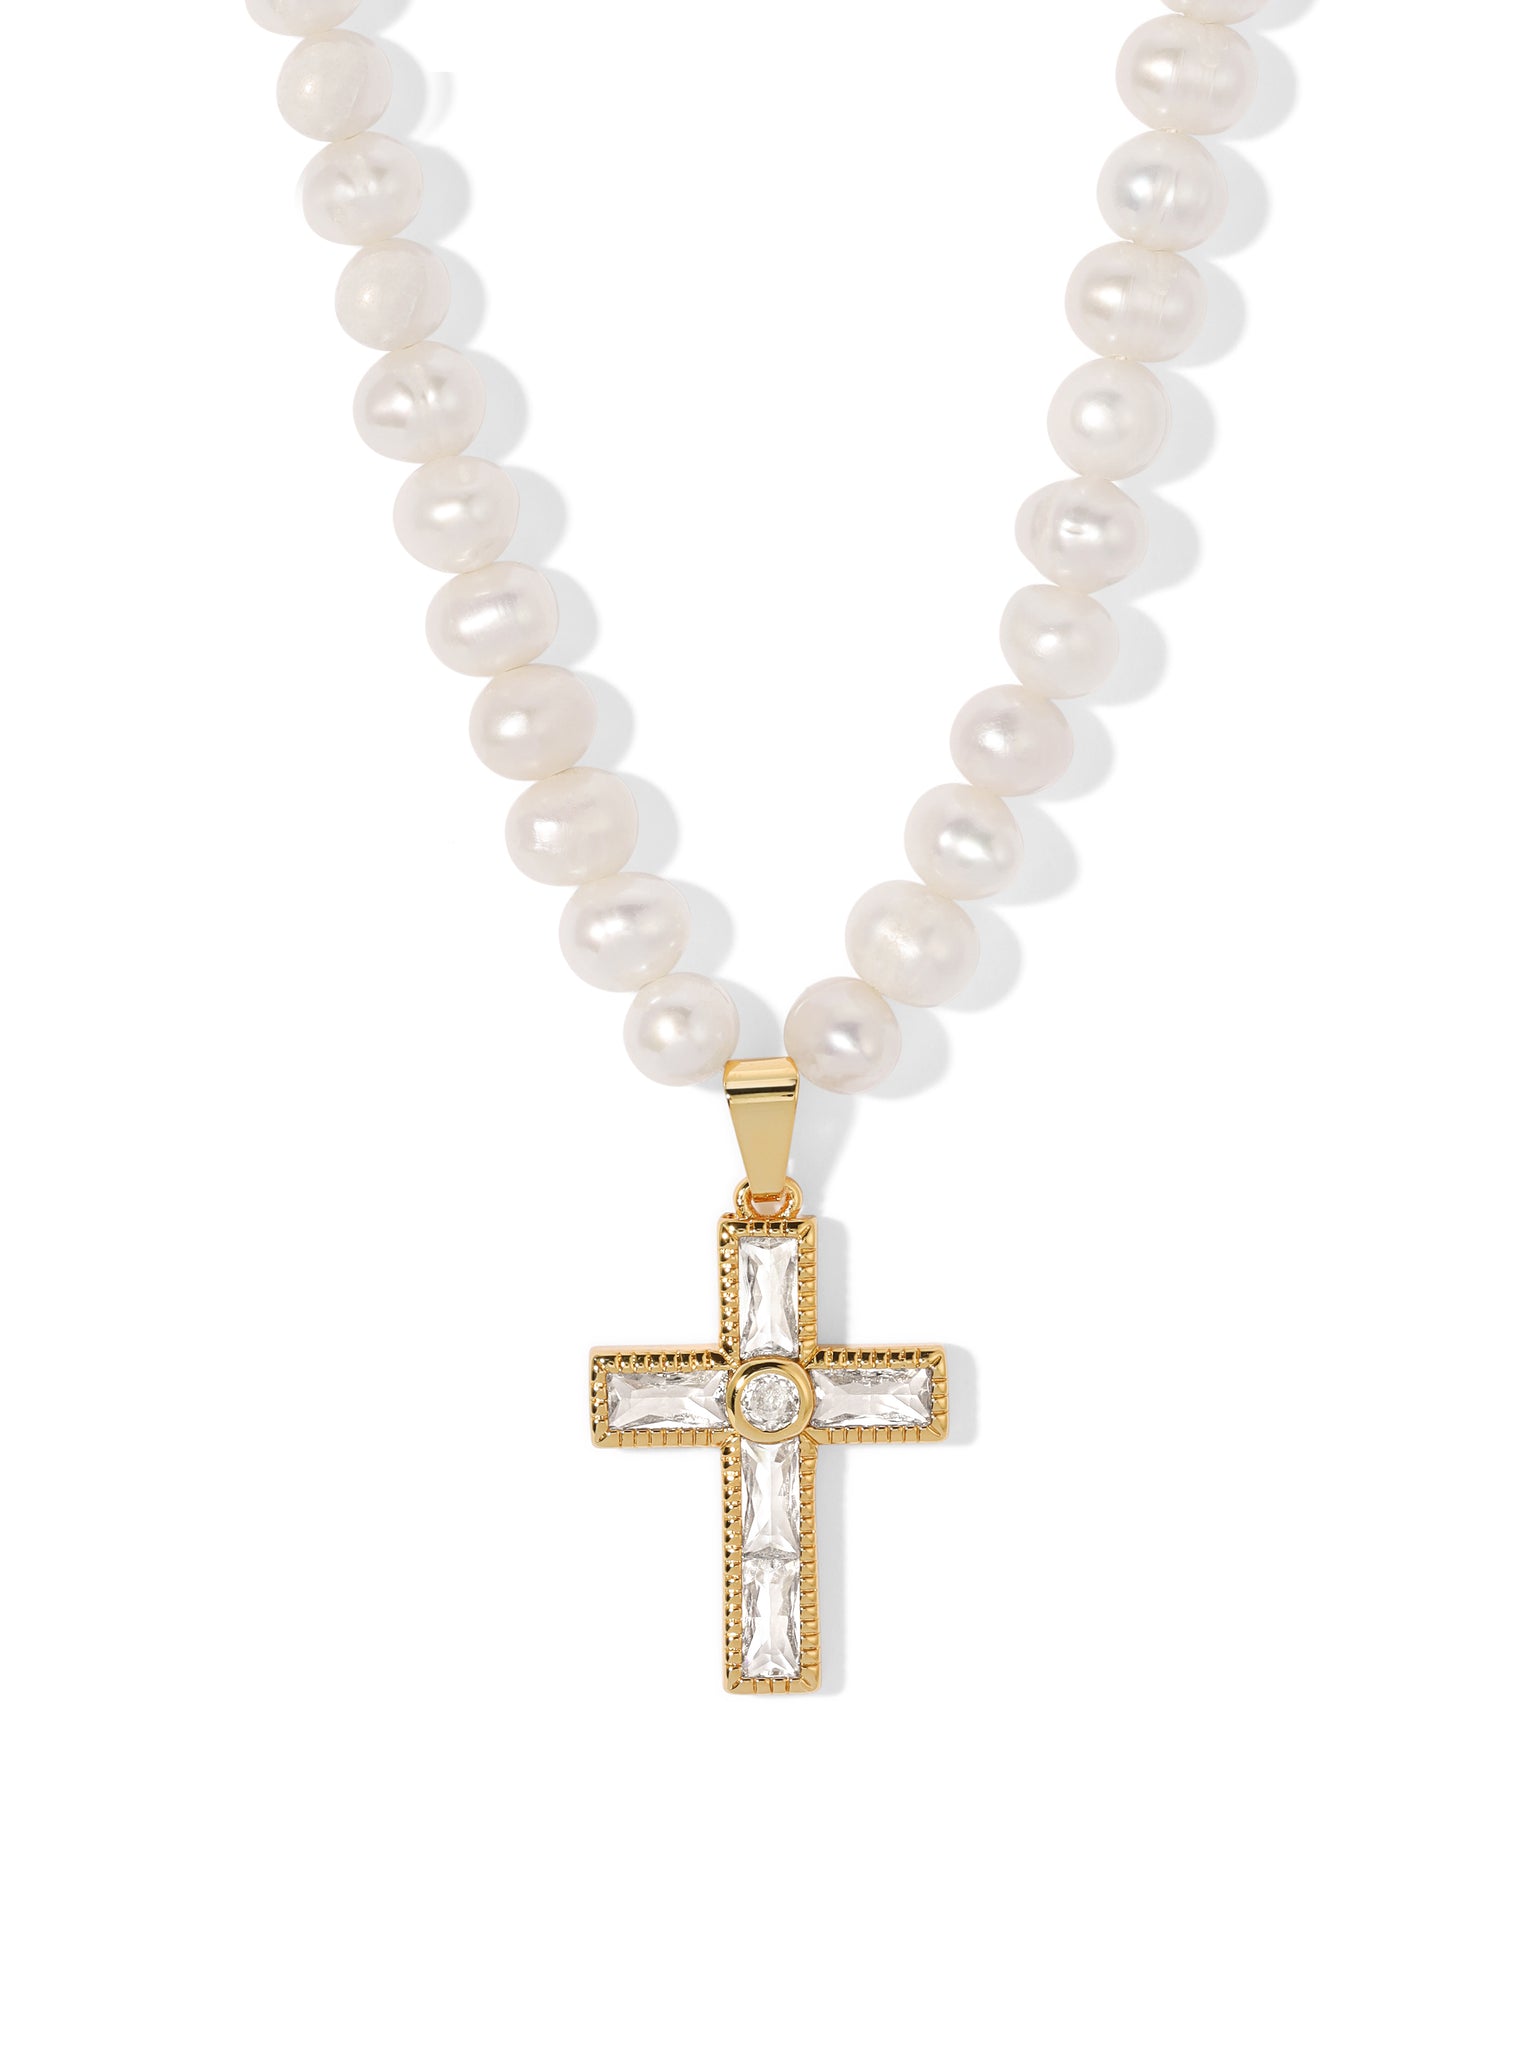 The Asher Cross Necklace